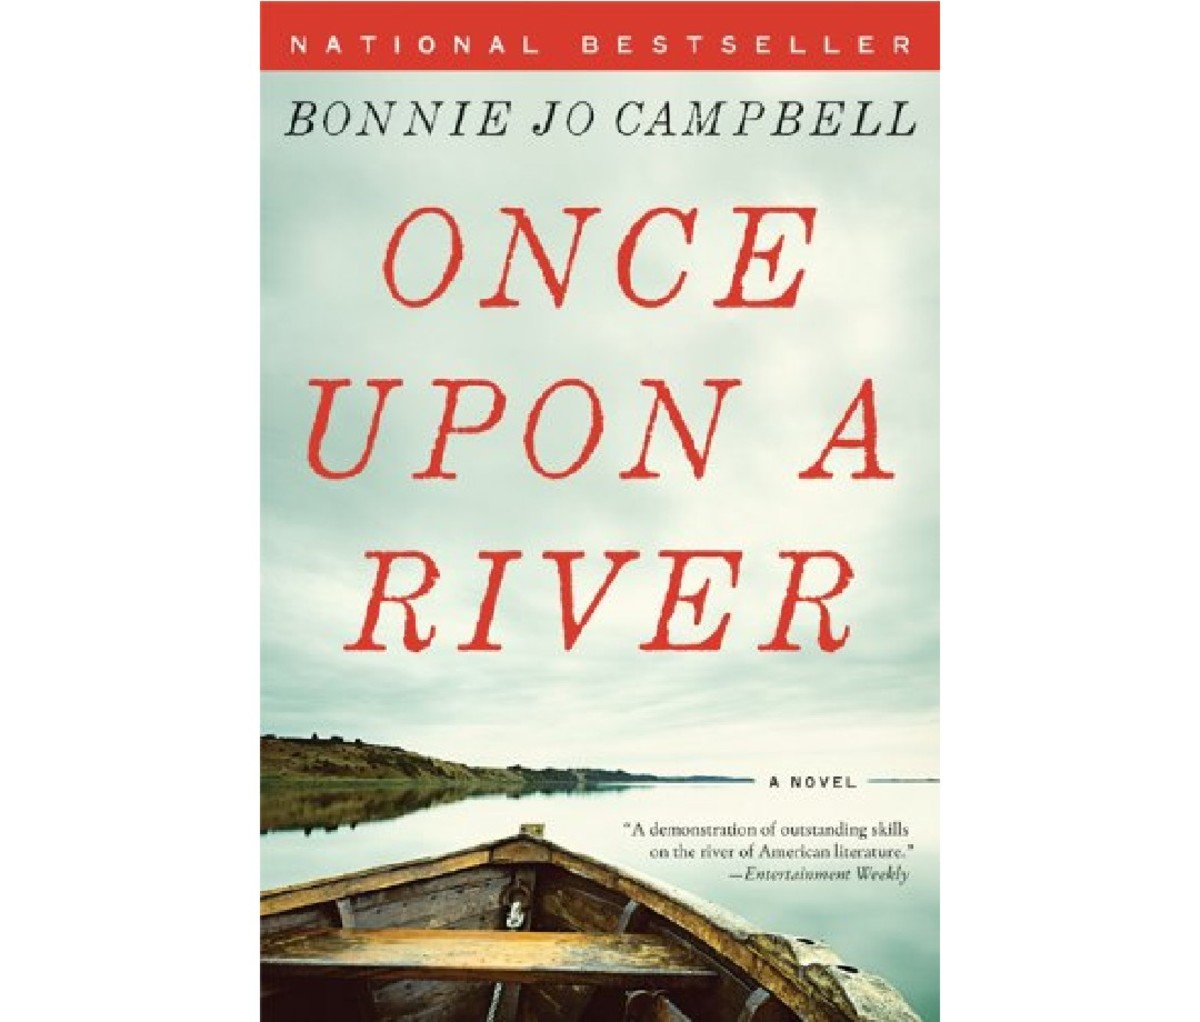 Once Upon a River by Bonnie Jo Campbell